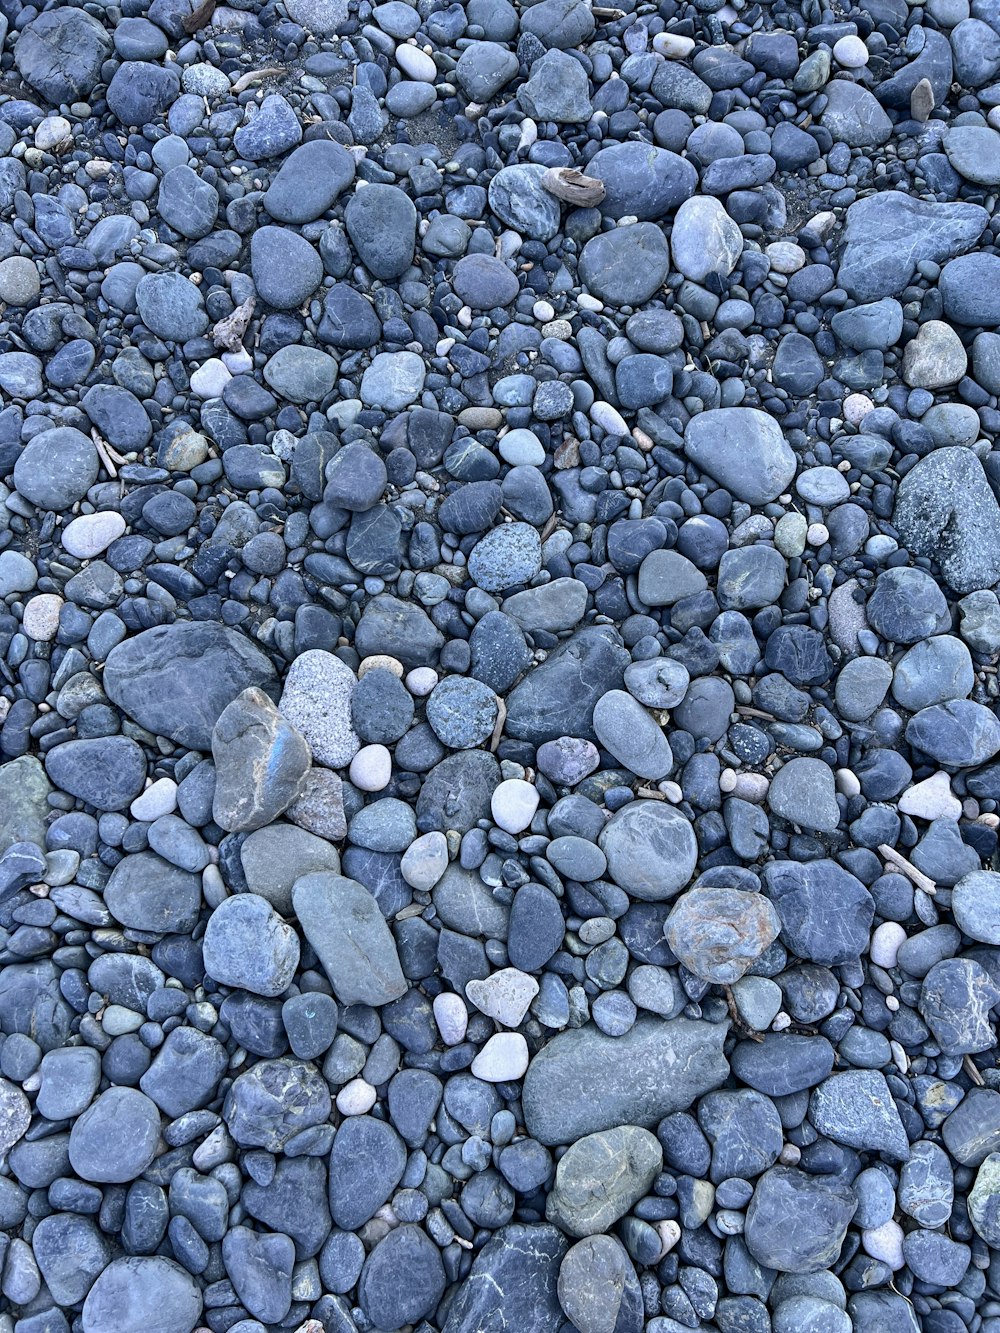 a close-up of a gravel